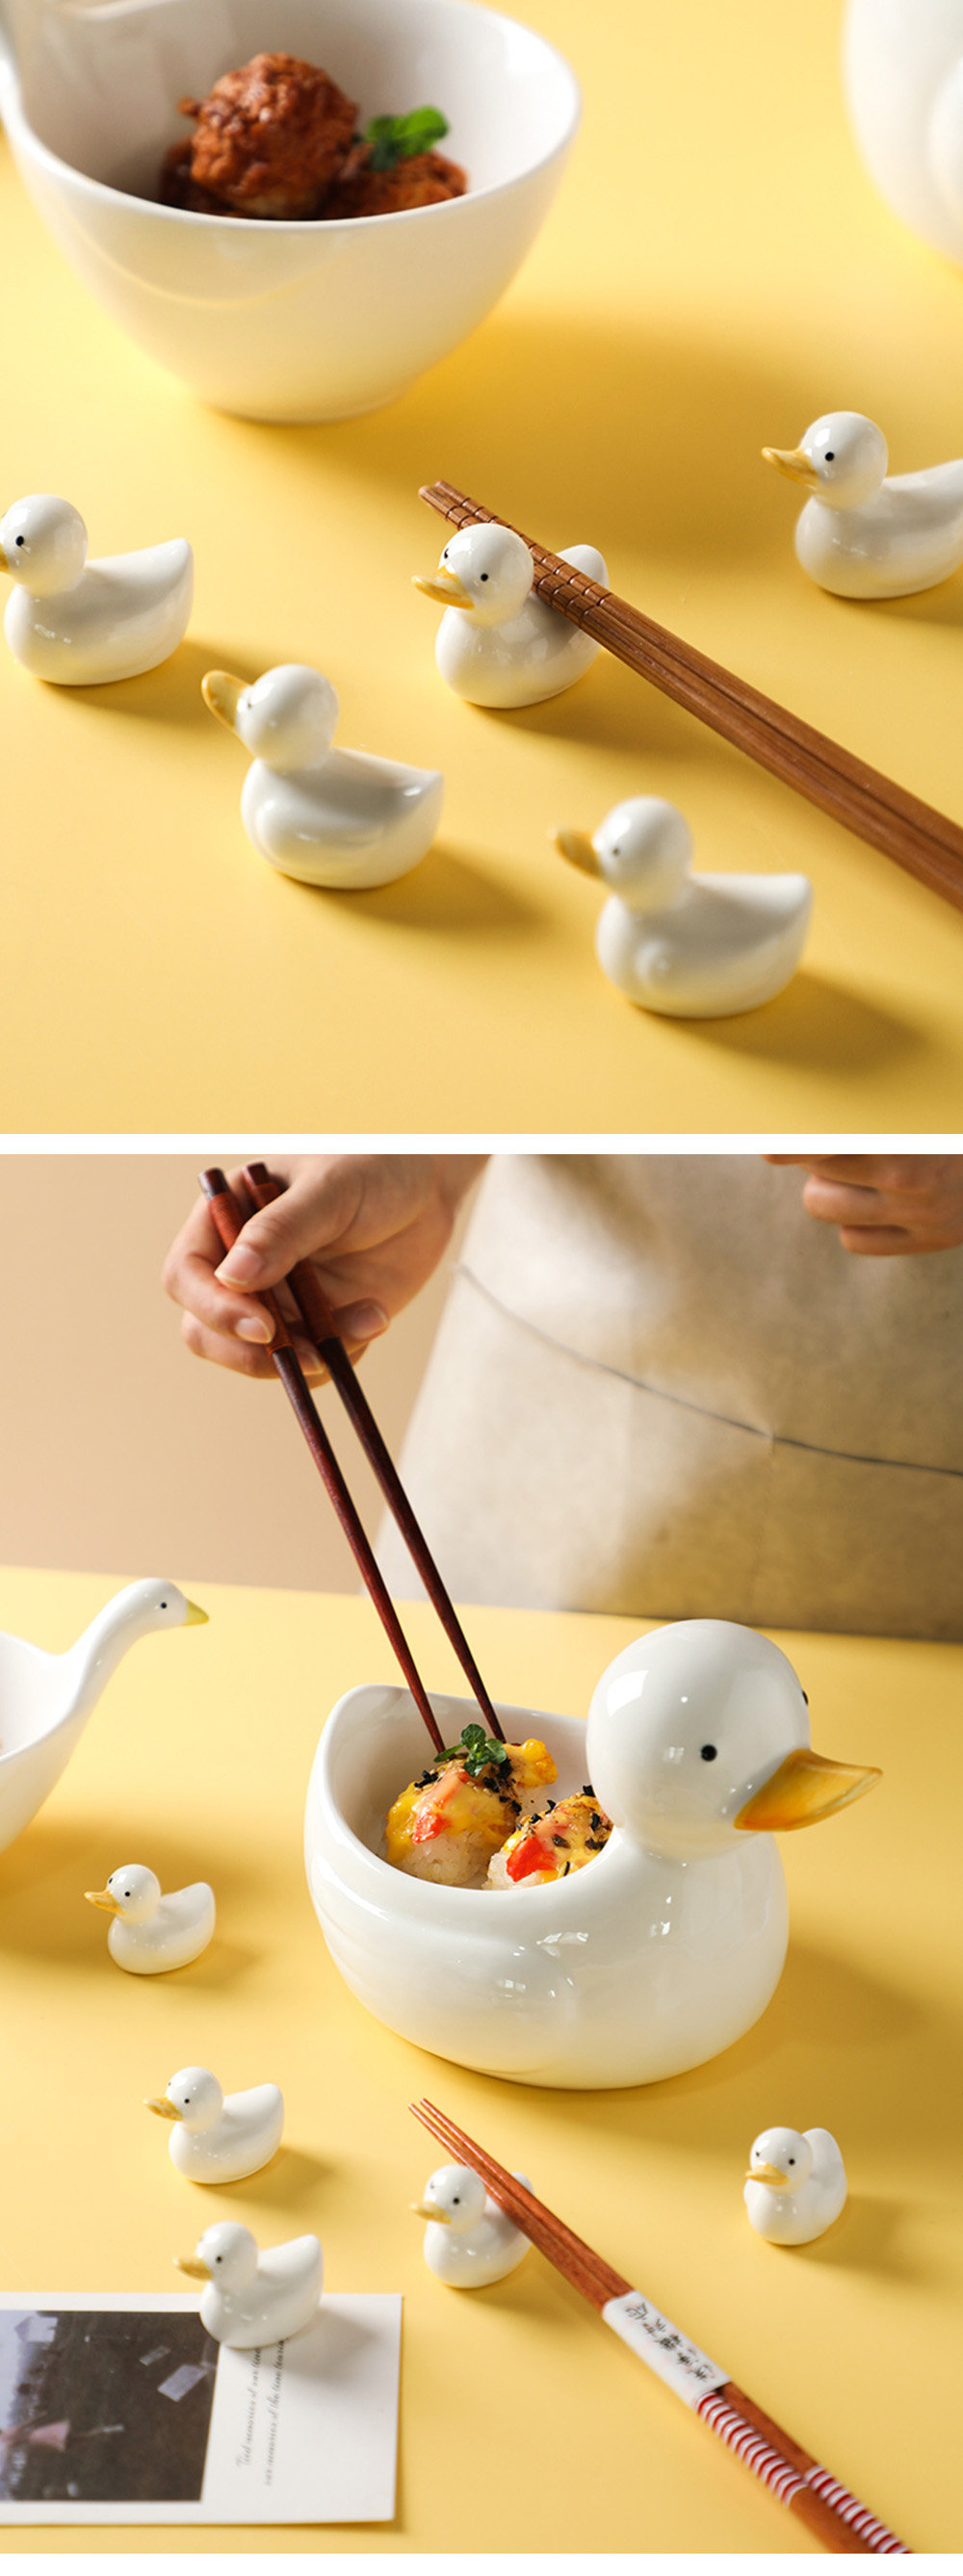 Cute Duck Inspired Chopstick Rest Set And Bowl - ApolloBox